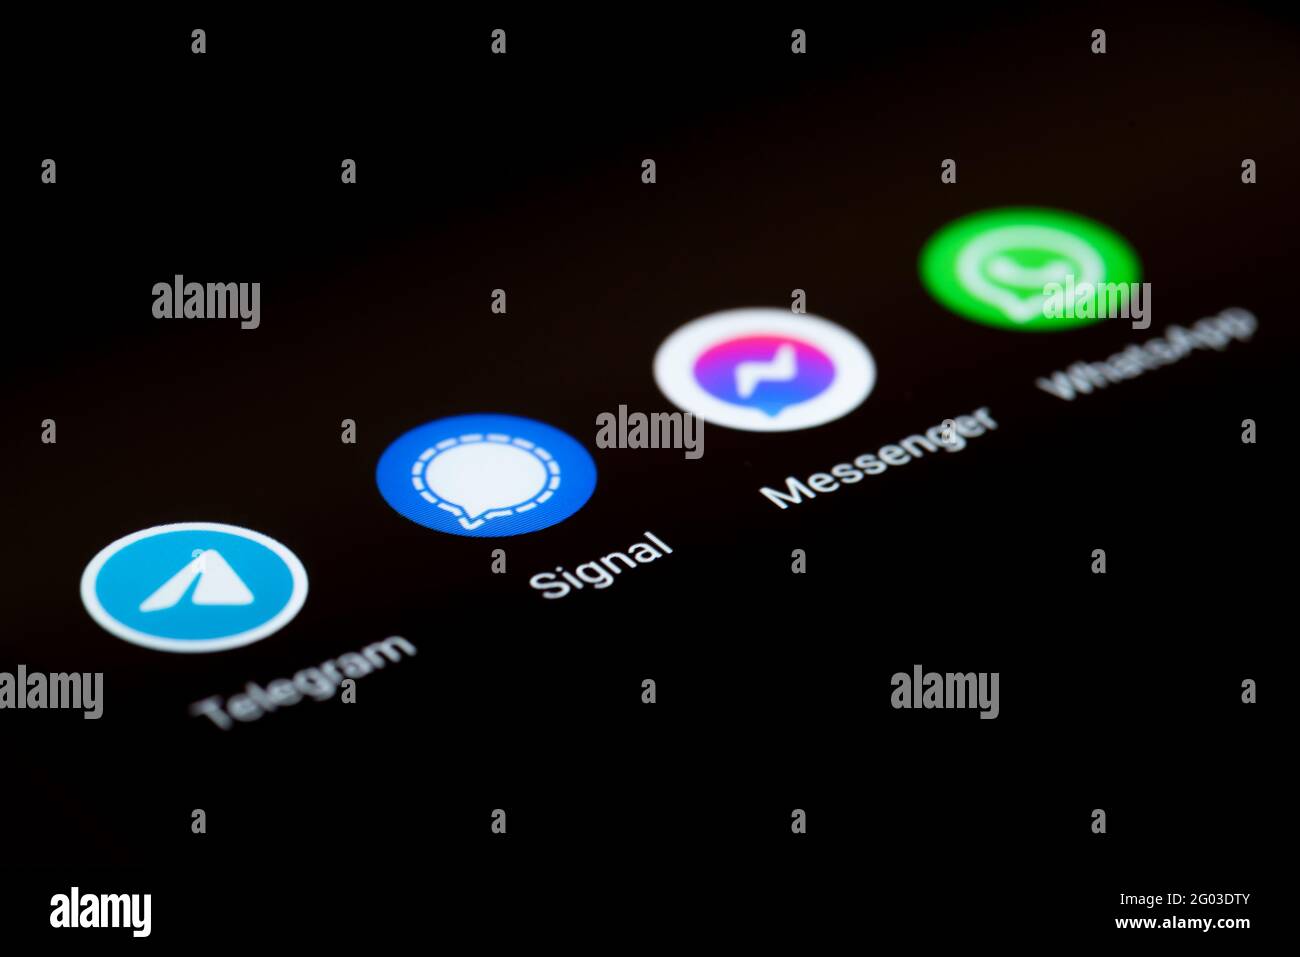 31-05-2021 Hamburg, Germany: close-up view of app icons of different messaging apps on smartphone display, Telegram, Signal, Facebook Messenger and Stock Photo